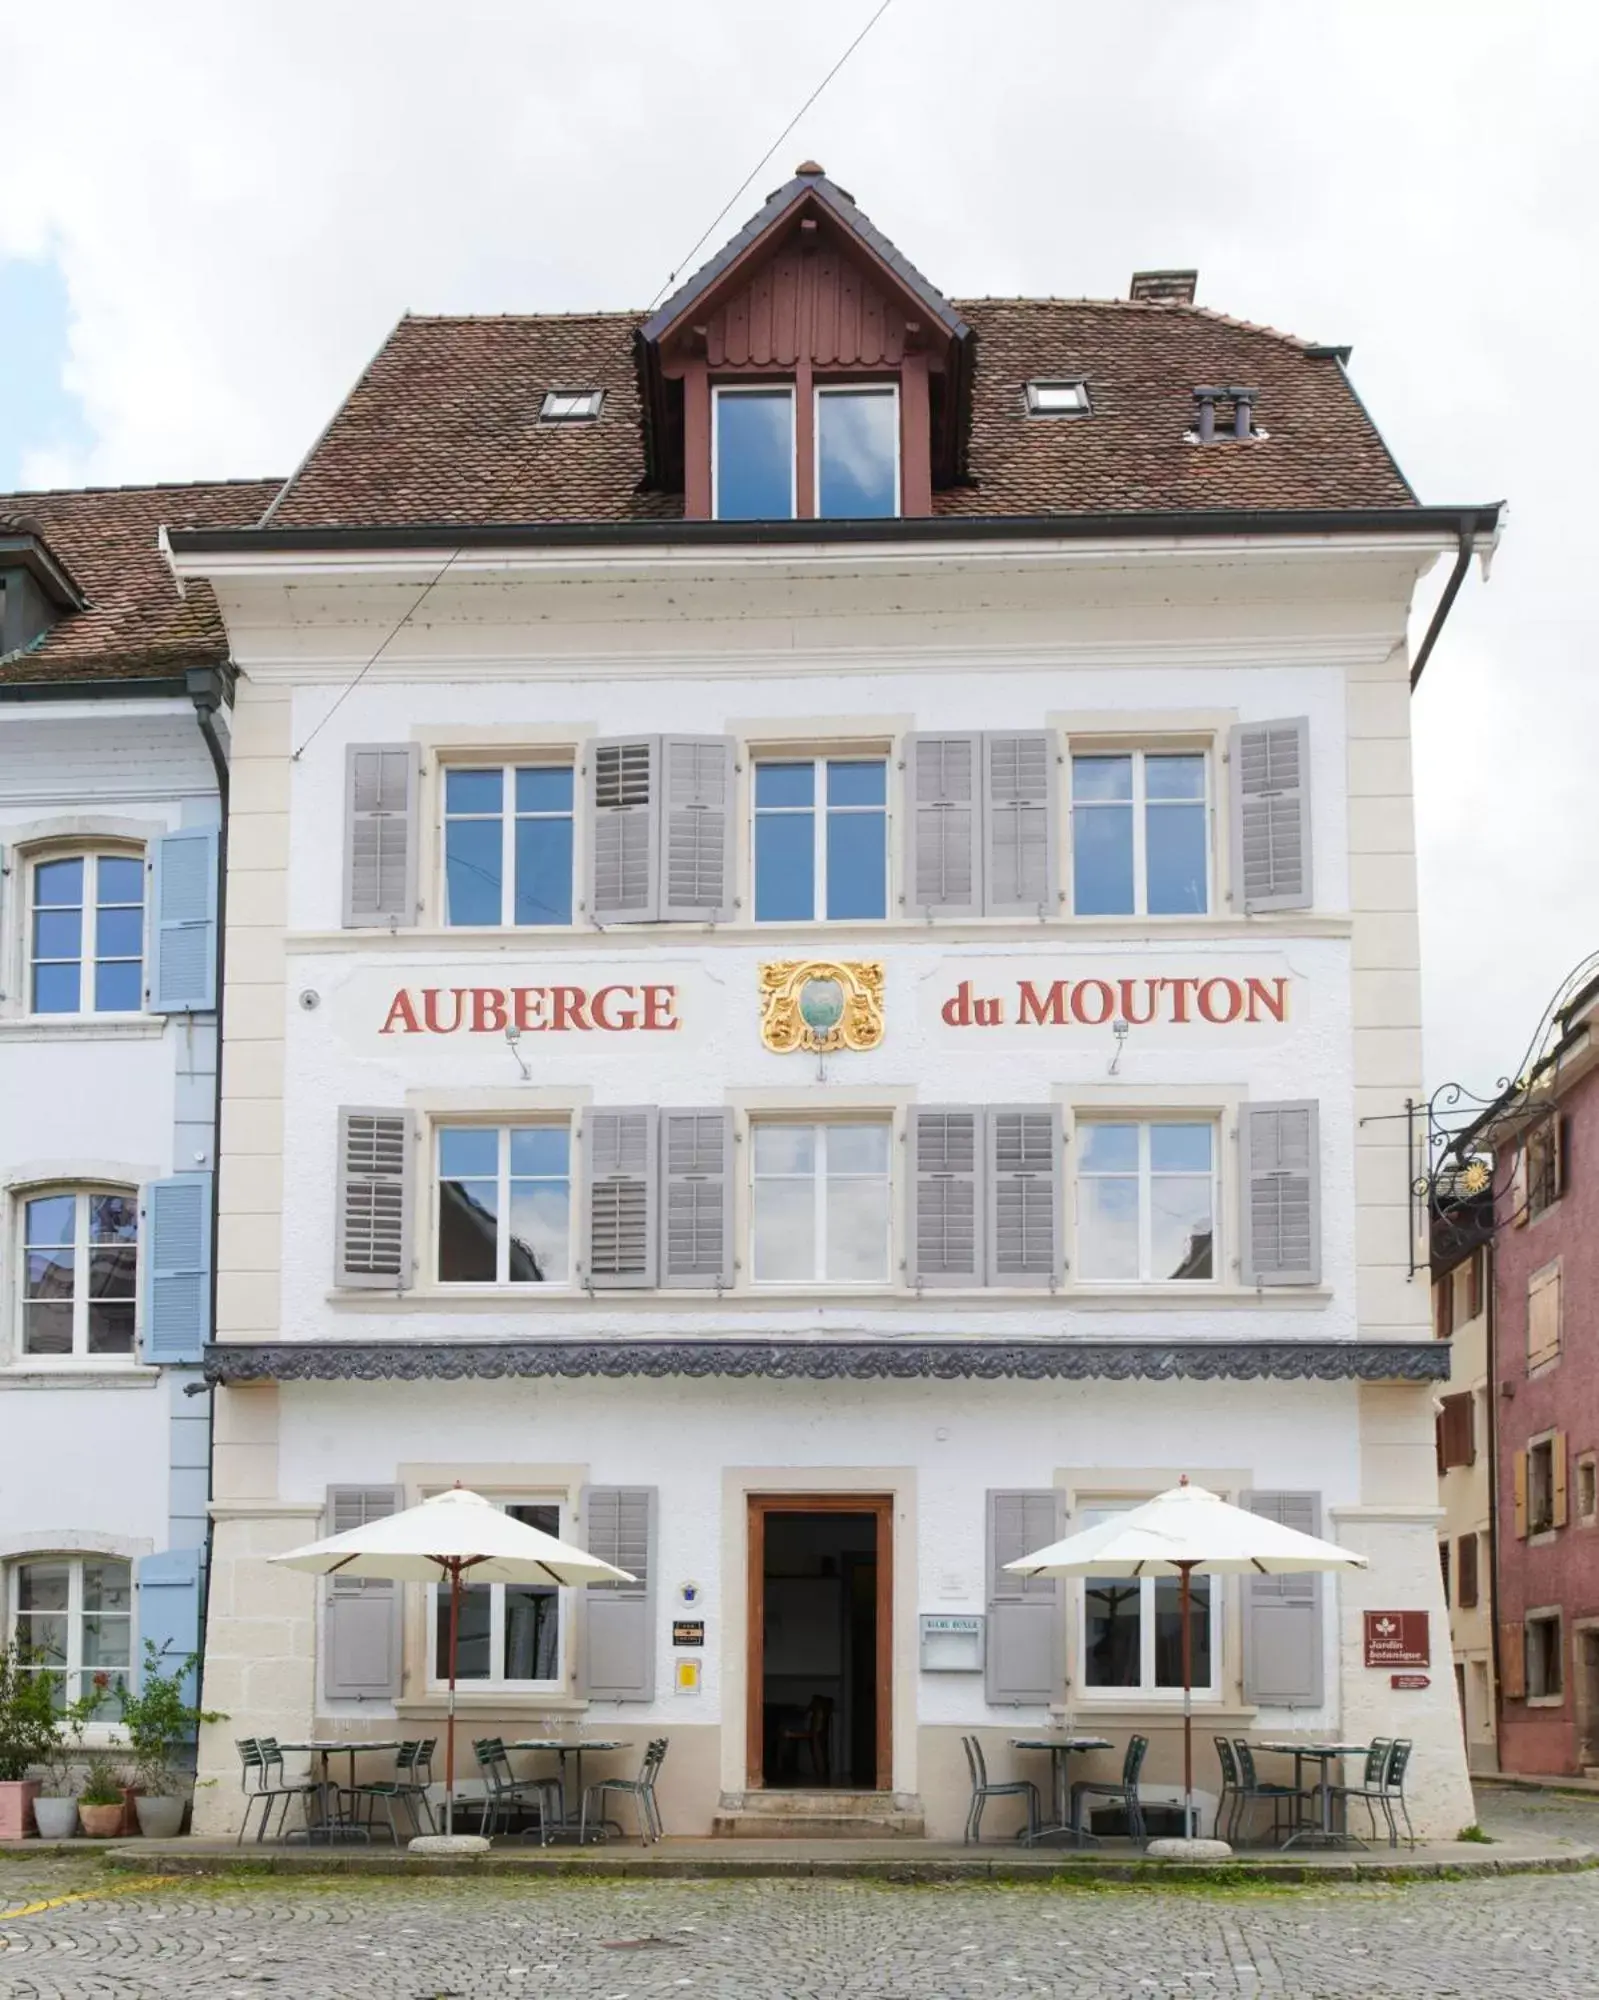 Property Building in Auberge du Mouton